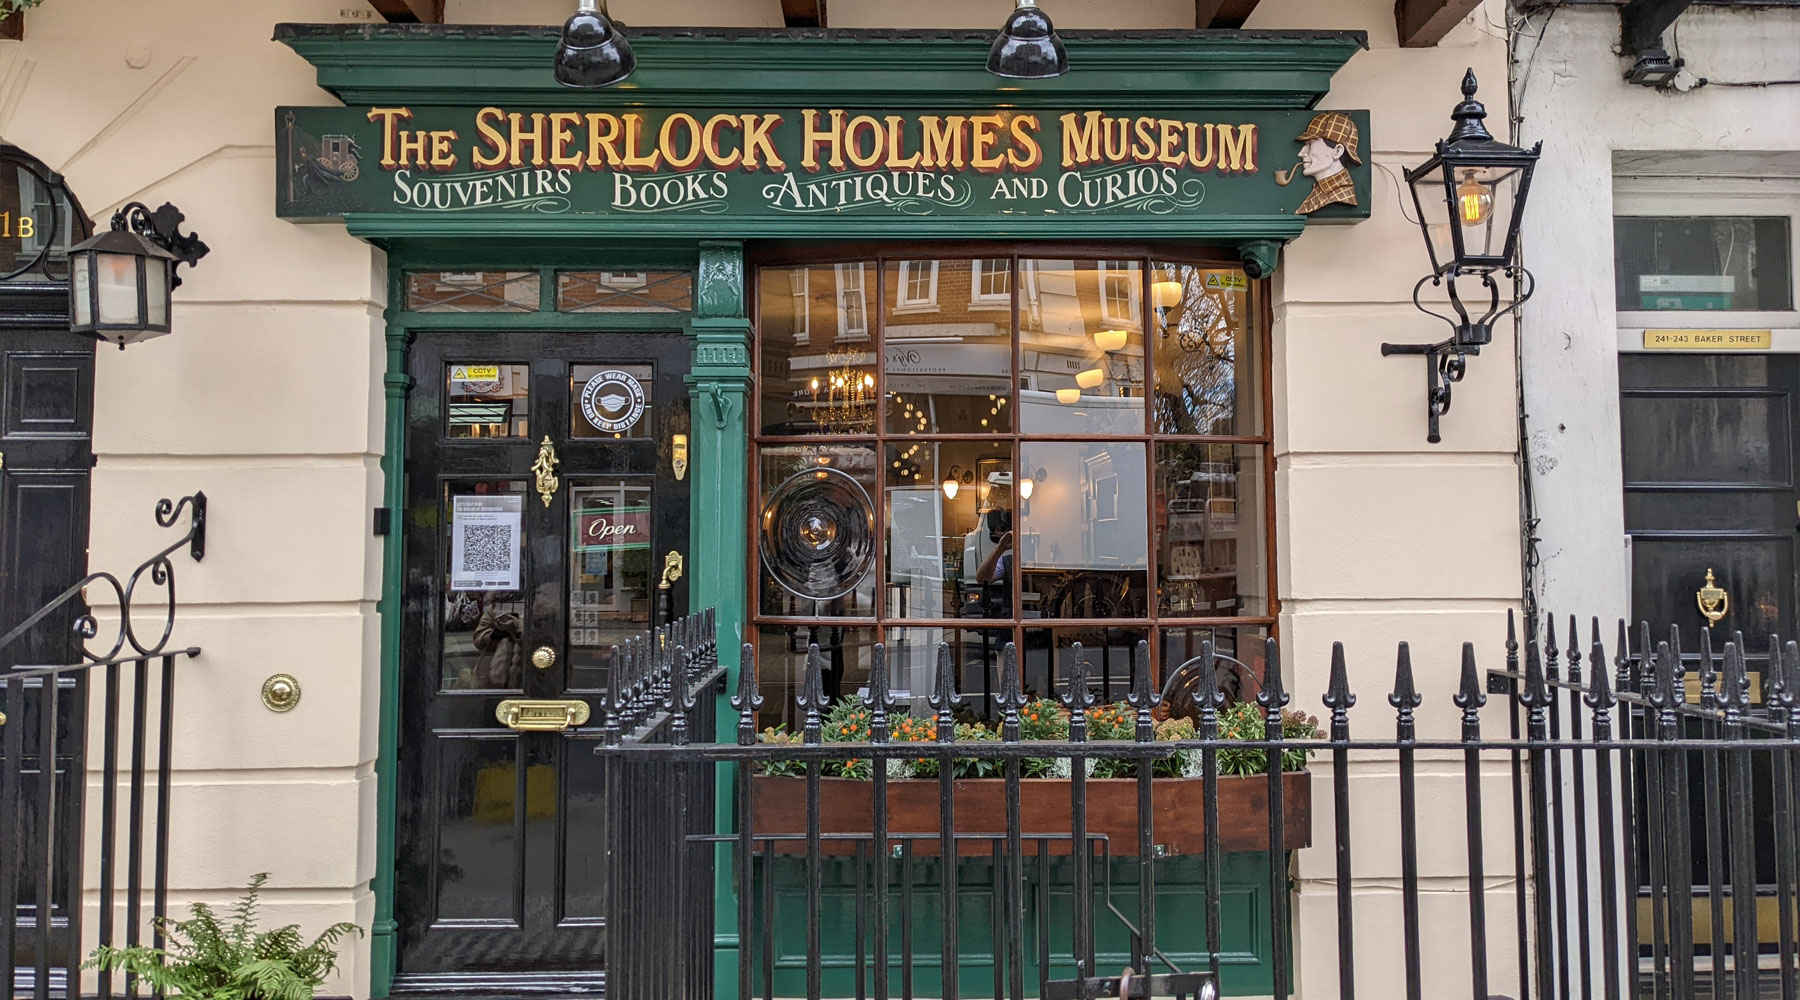 A visit to the Sherlock Holmes museum